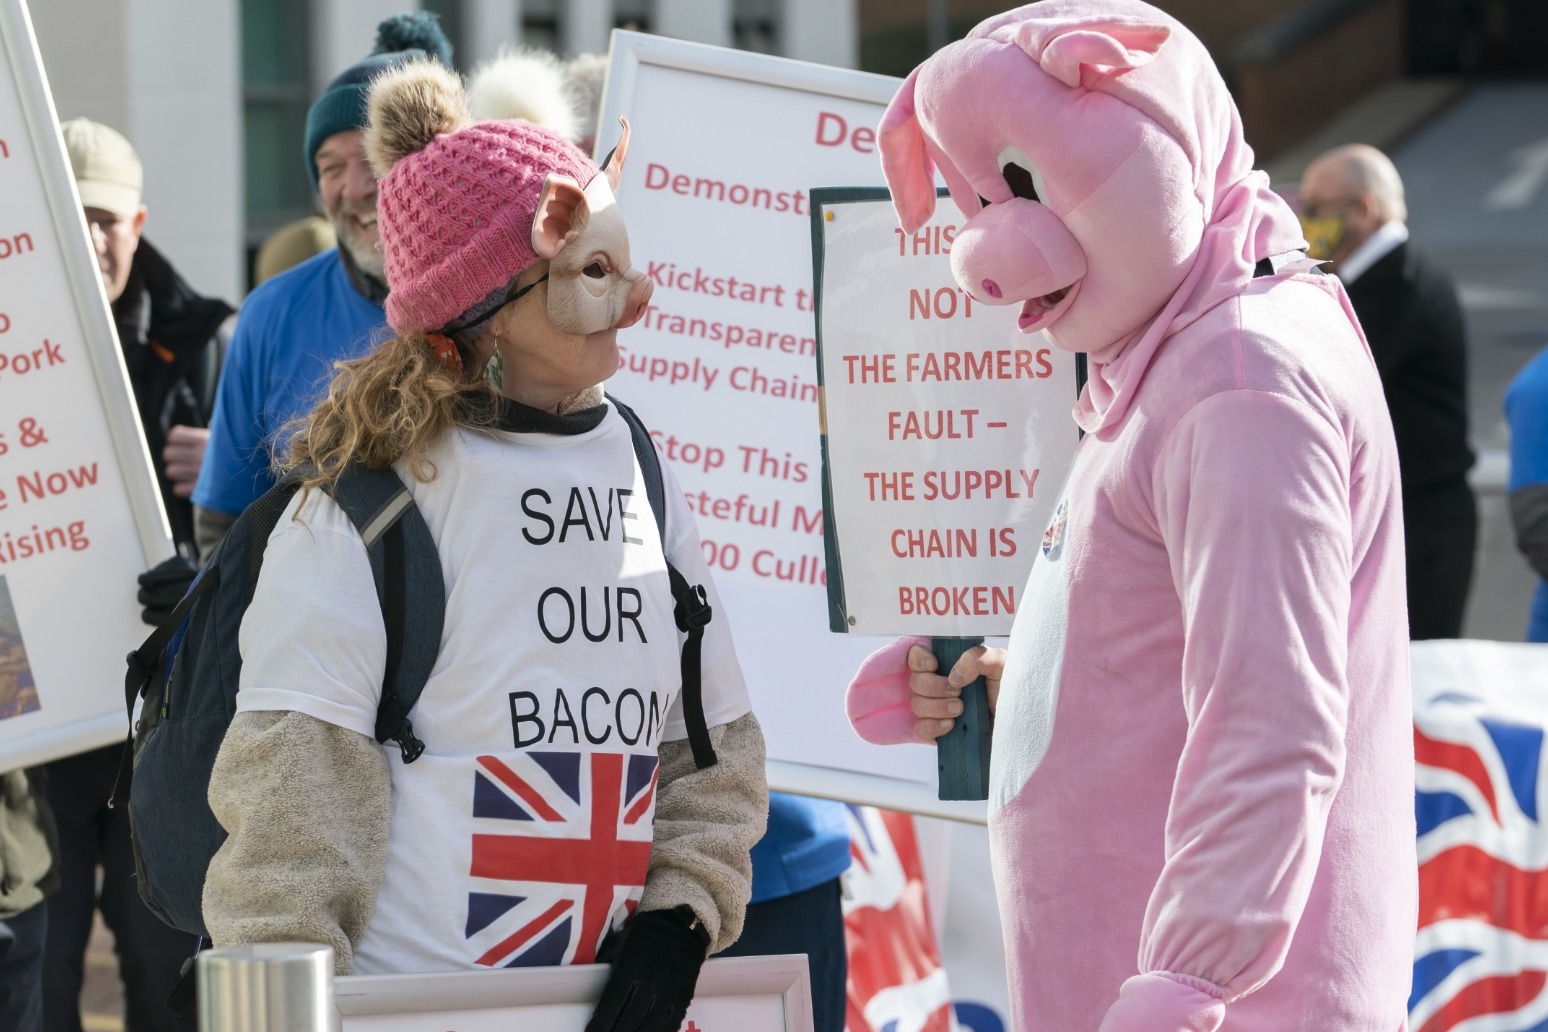 Summit held to address ‘desperate’ crisis facing pig industry 